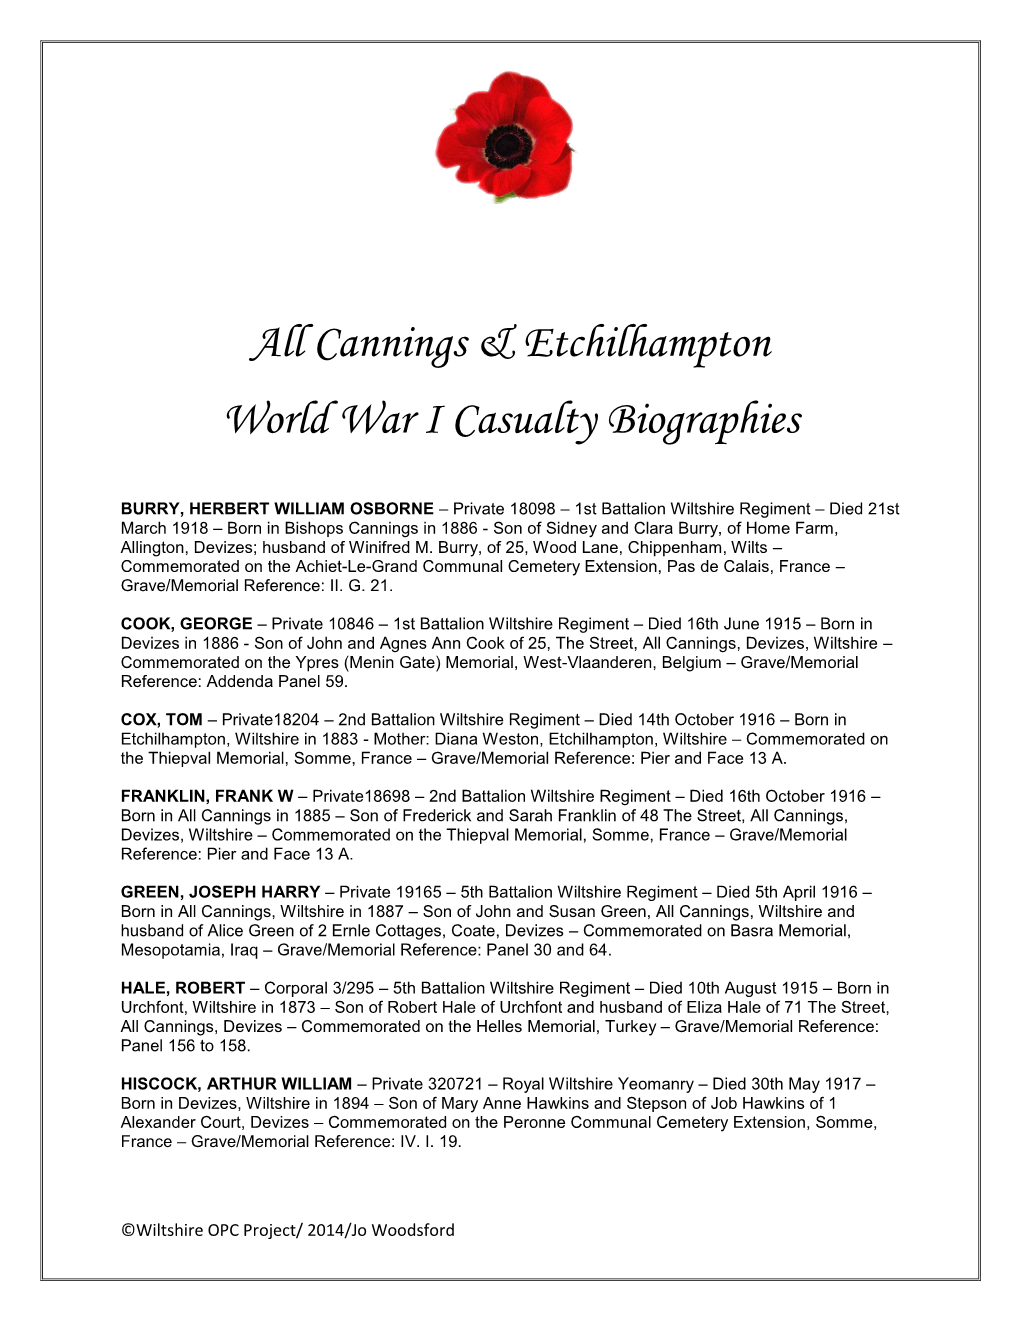 All Cannings & Etchilhampton World War I Casualty Biographies